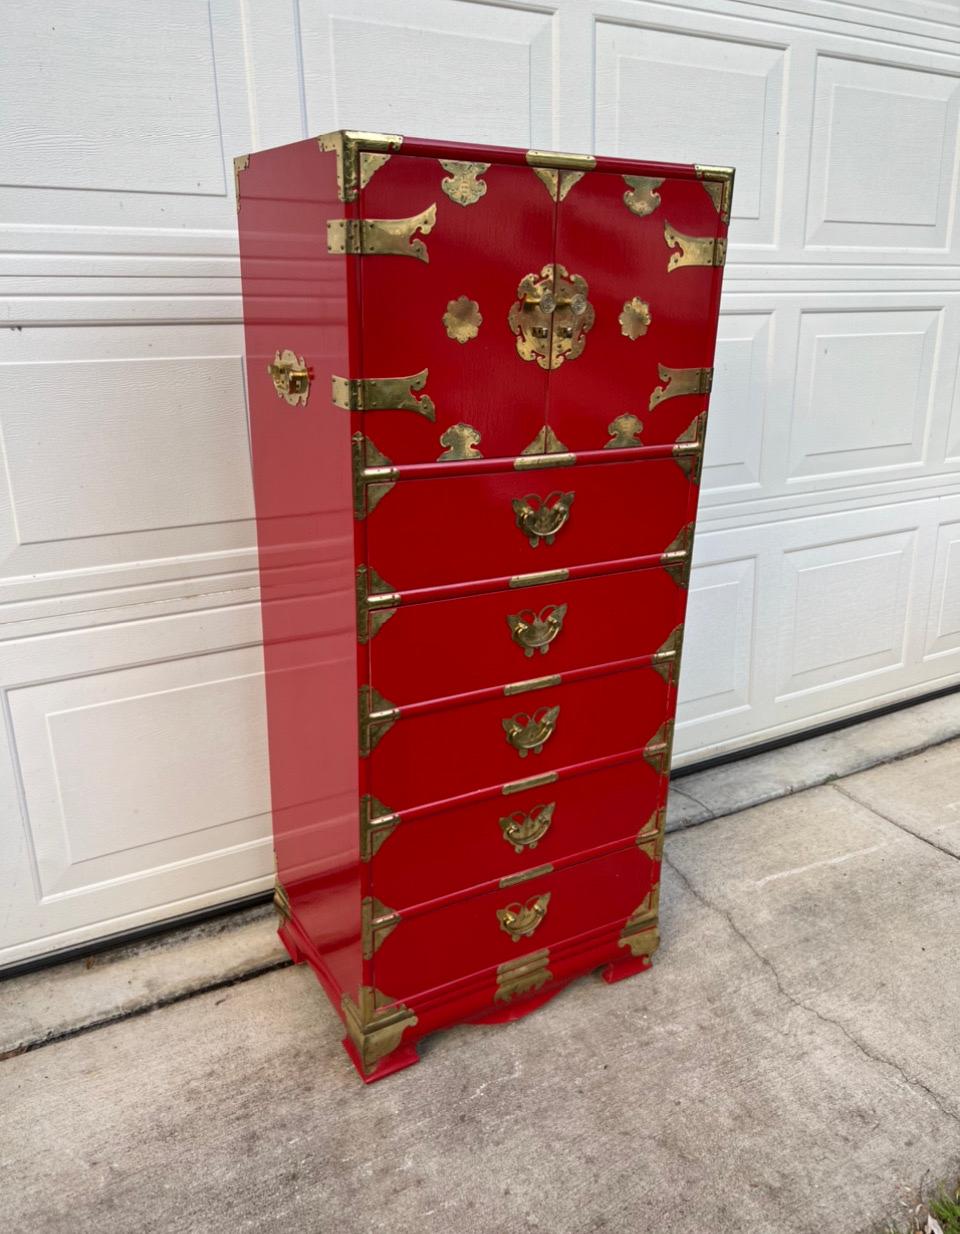 Mid 20th century brass mounted red lacquered lingerie / tansu campaign high chest with profuse engraved brass butterfly and medallion mounts, two blind doors revealing 4 small fitted interior upper drawers and 2 longer drawers over 5 full lower long